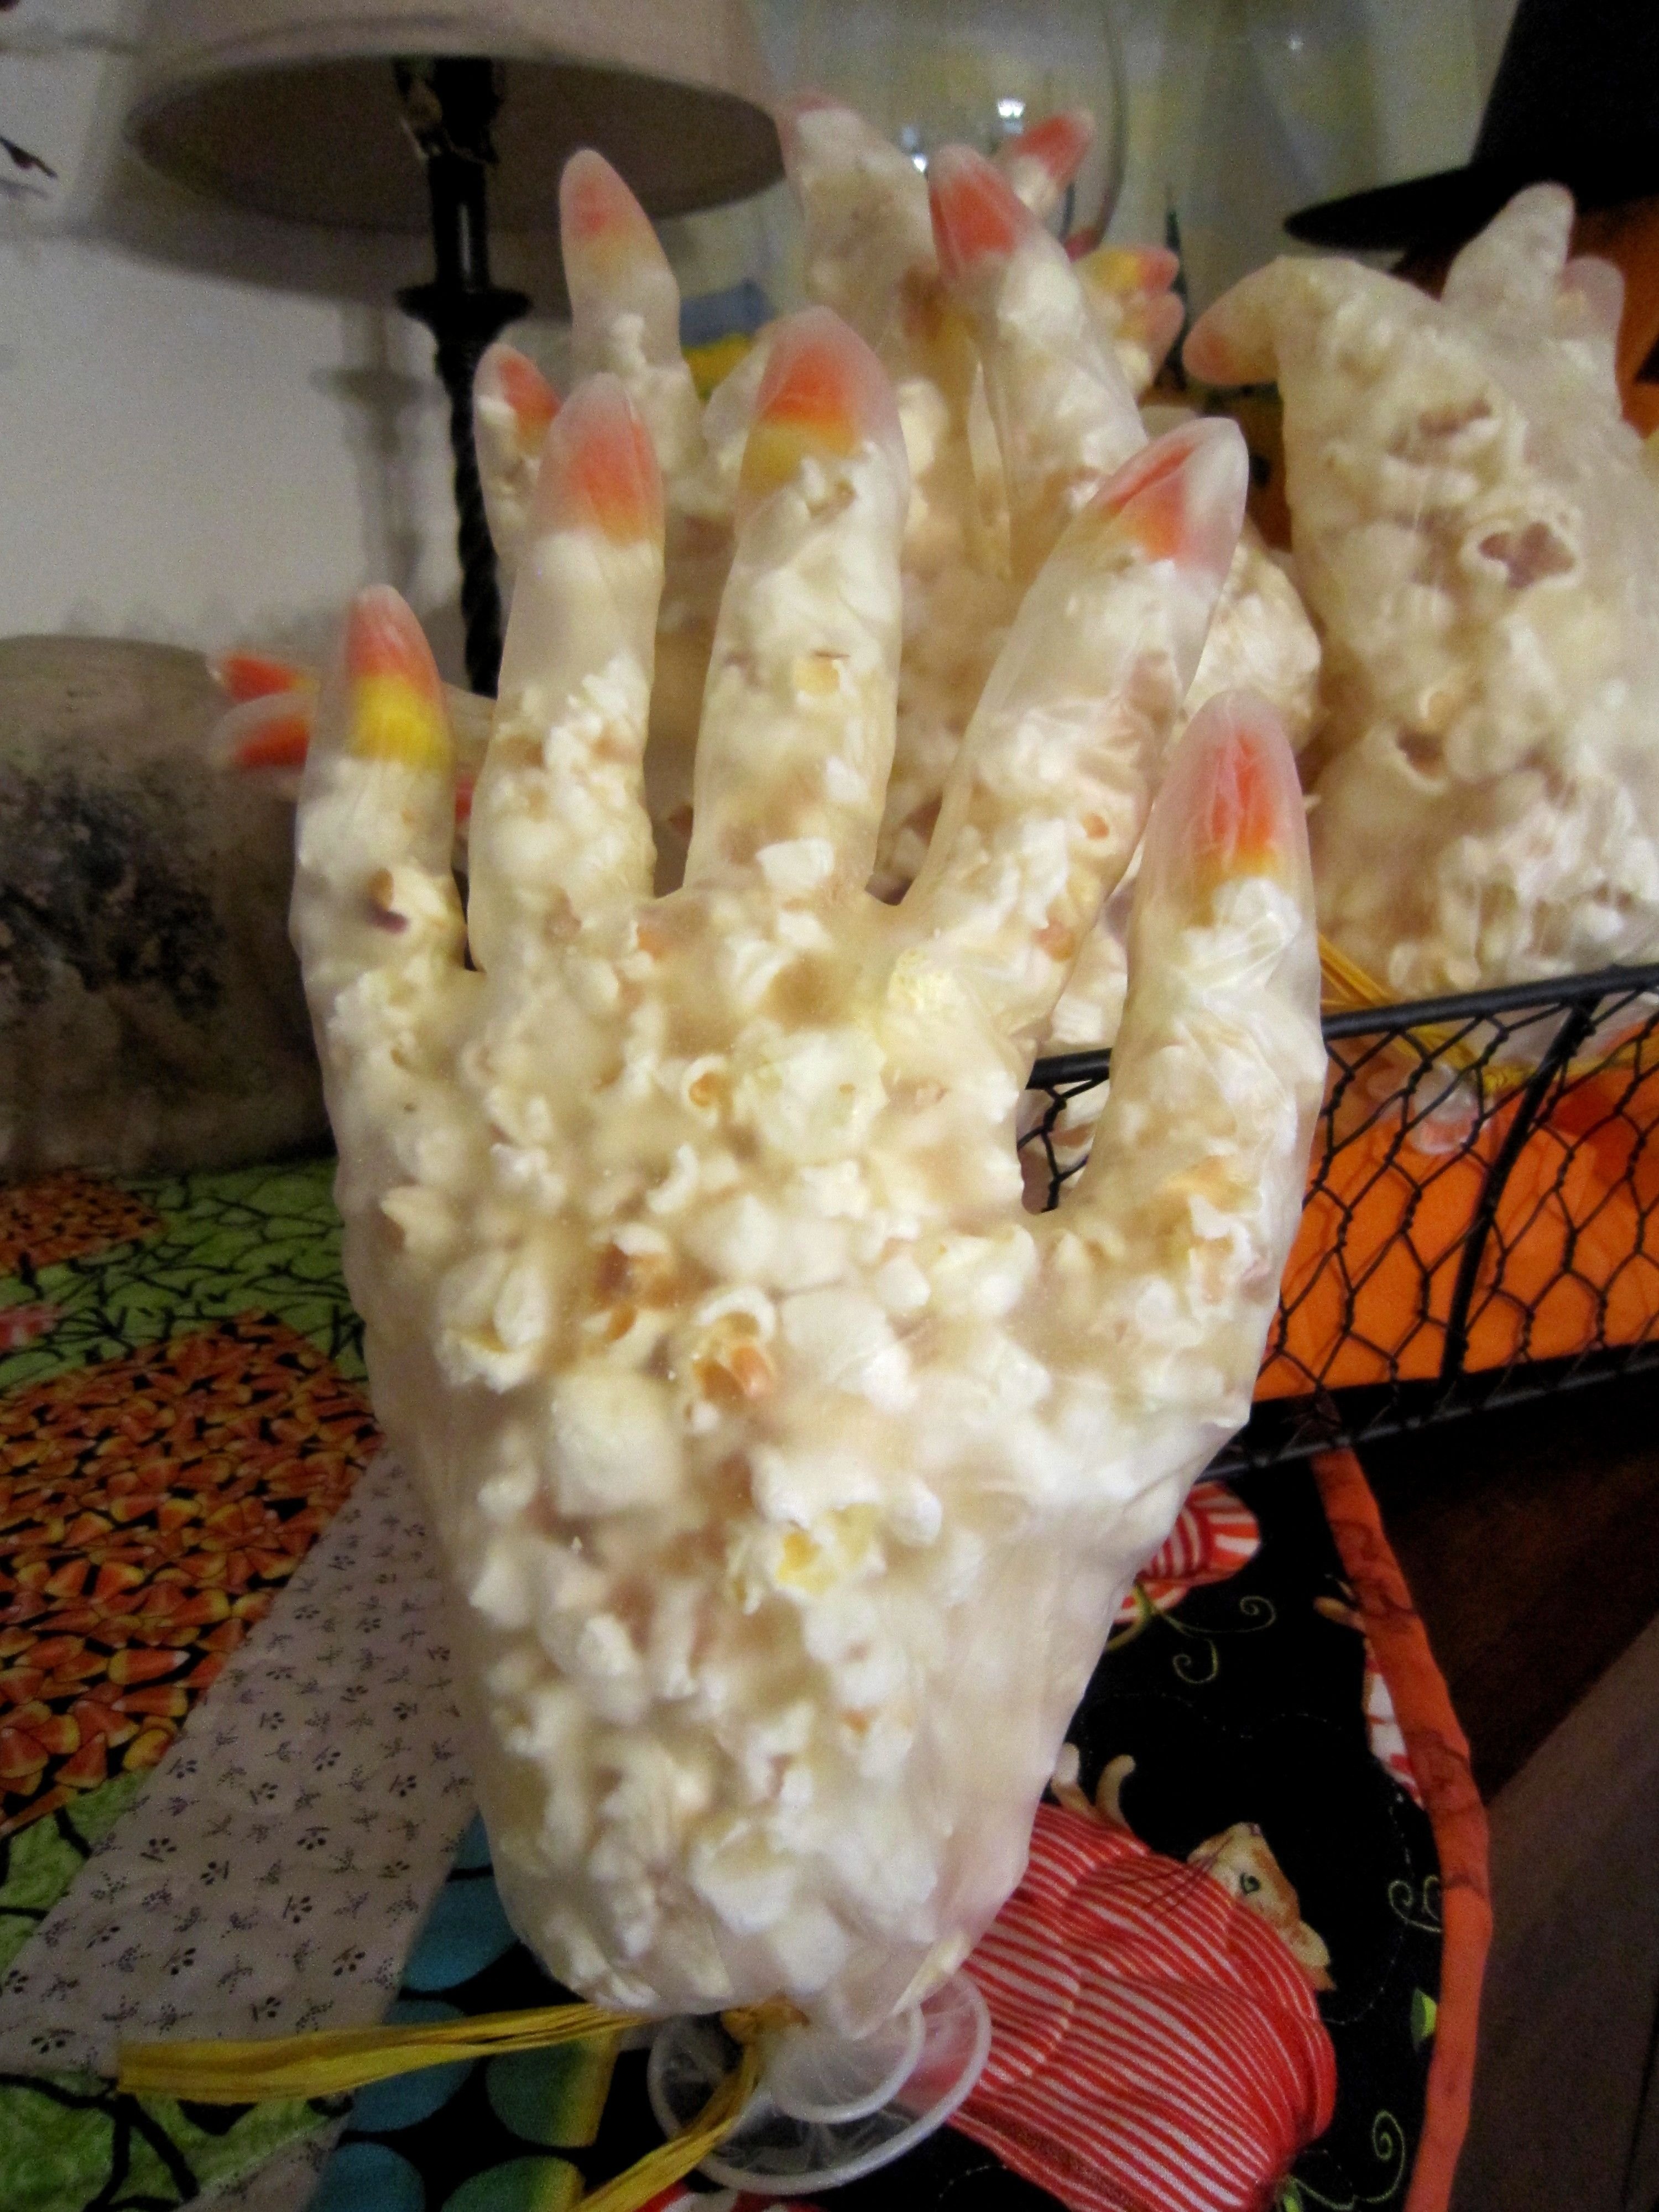 10 Most Recommended Halloween Party Ideas For Teenagers halloween party ideas for kids and teens popcorn candy corn 2 2022